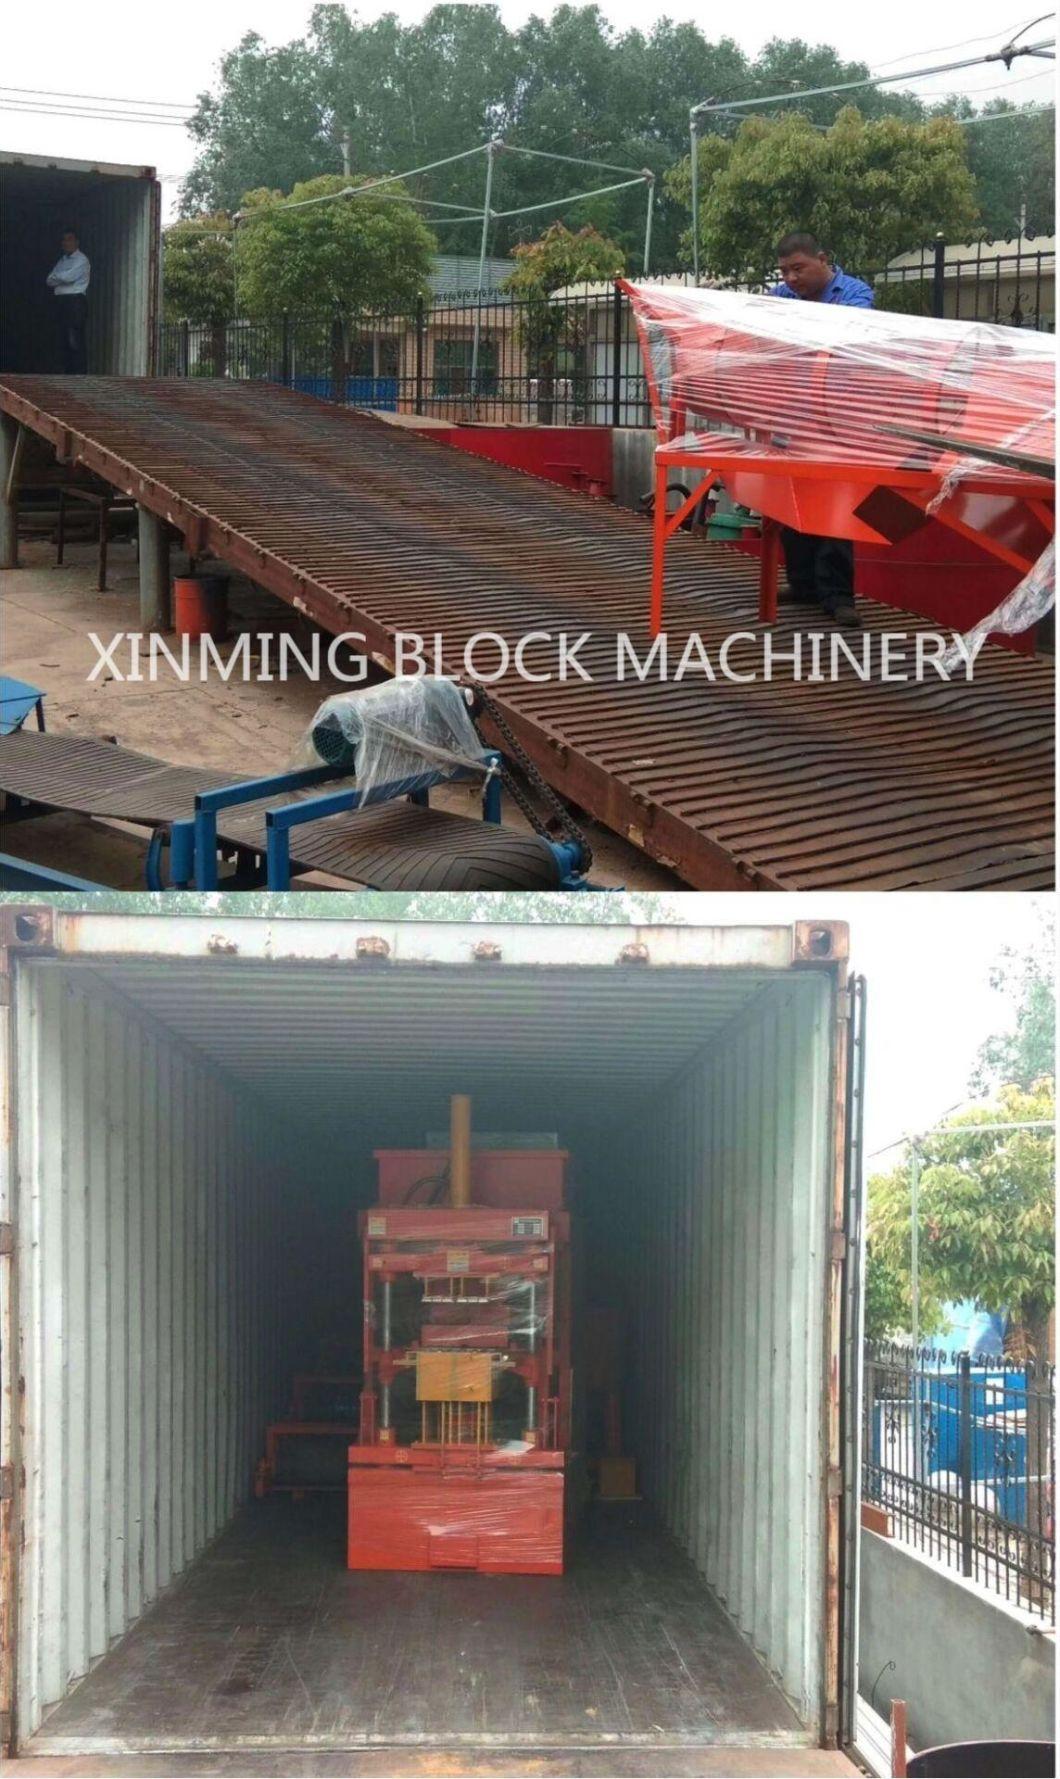 Factory Price Customed Block Making Machine Hollow Brick, Solid Brick, Clay Block, Pavement Block Making Machine for Commercial Use